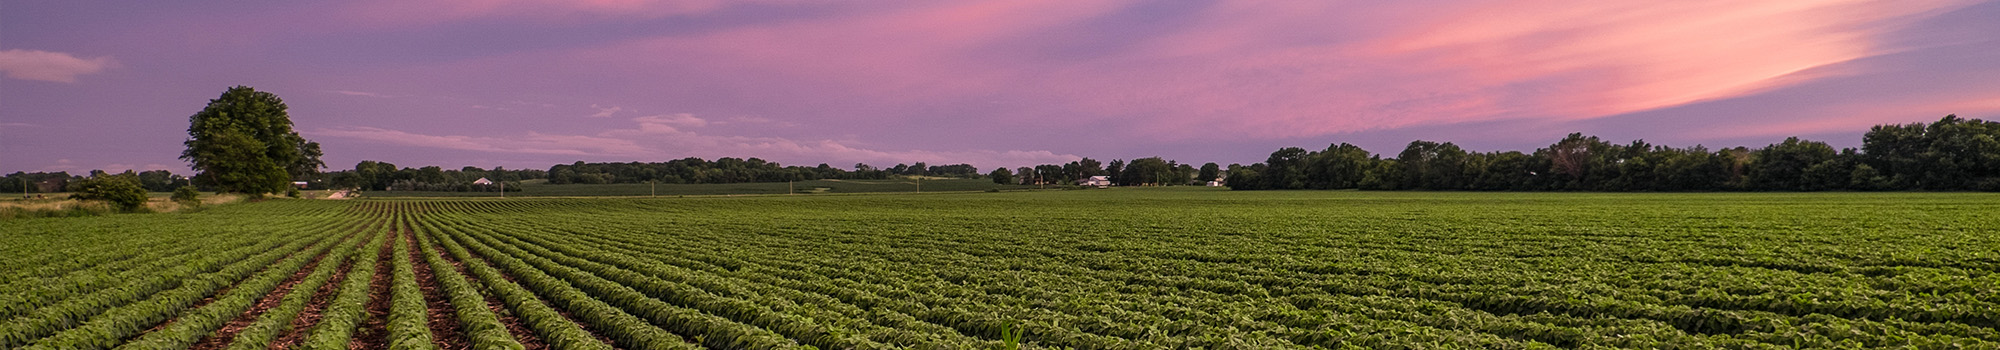 Rows of soybeans in field at dusk